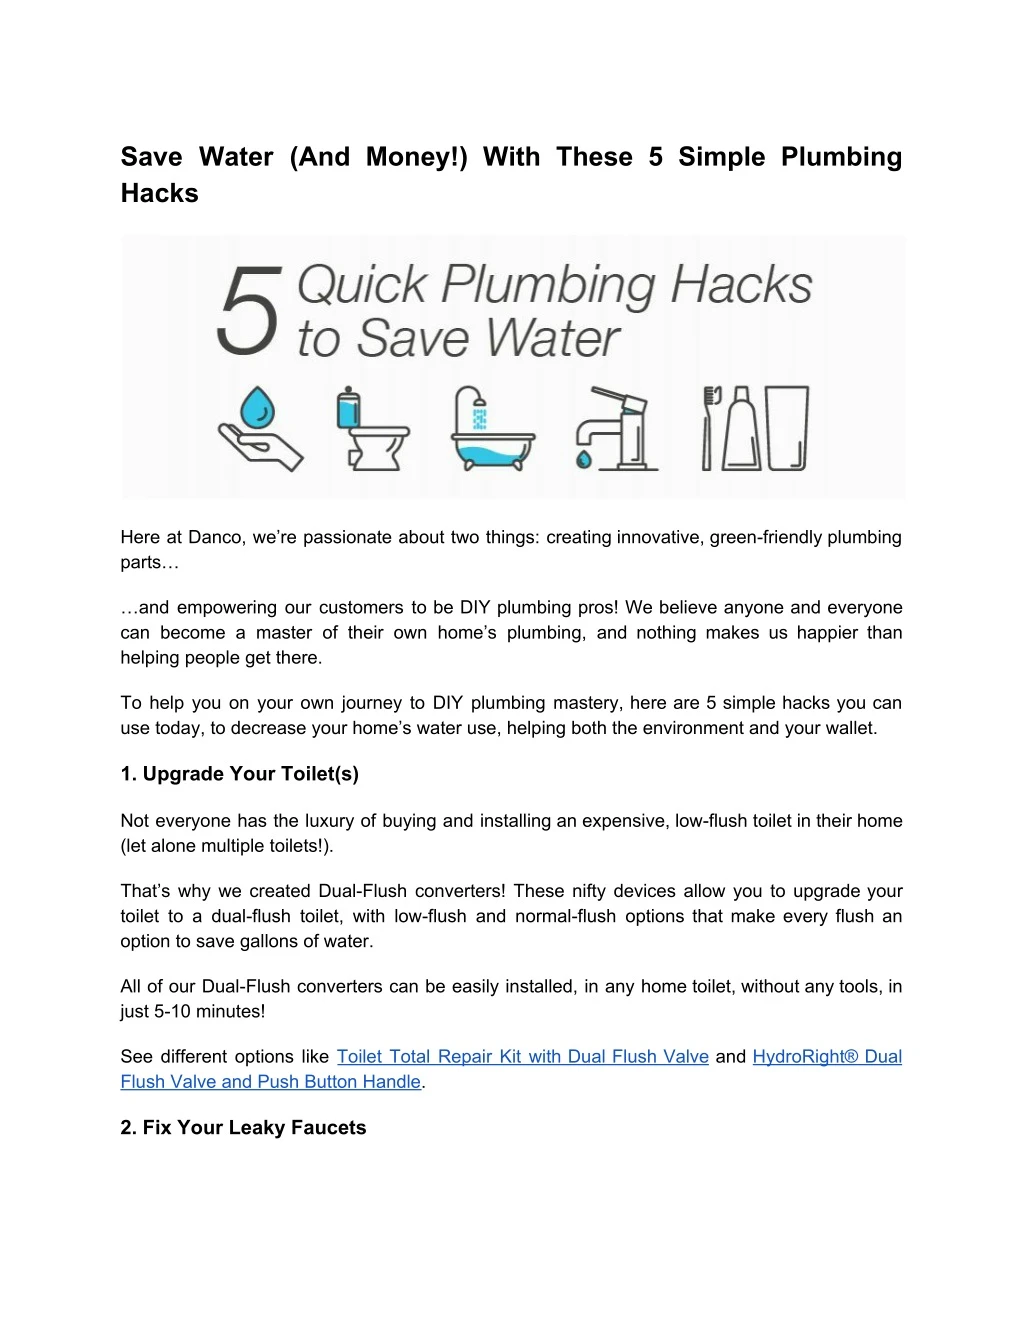 save water and money with these 5 simple plumbing